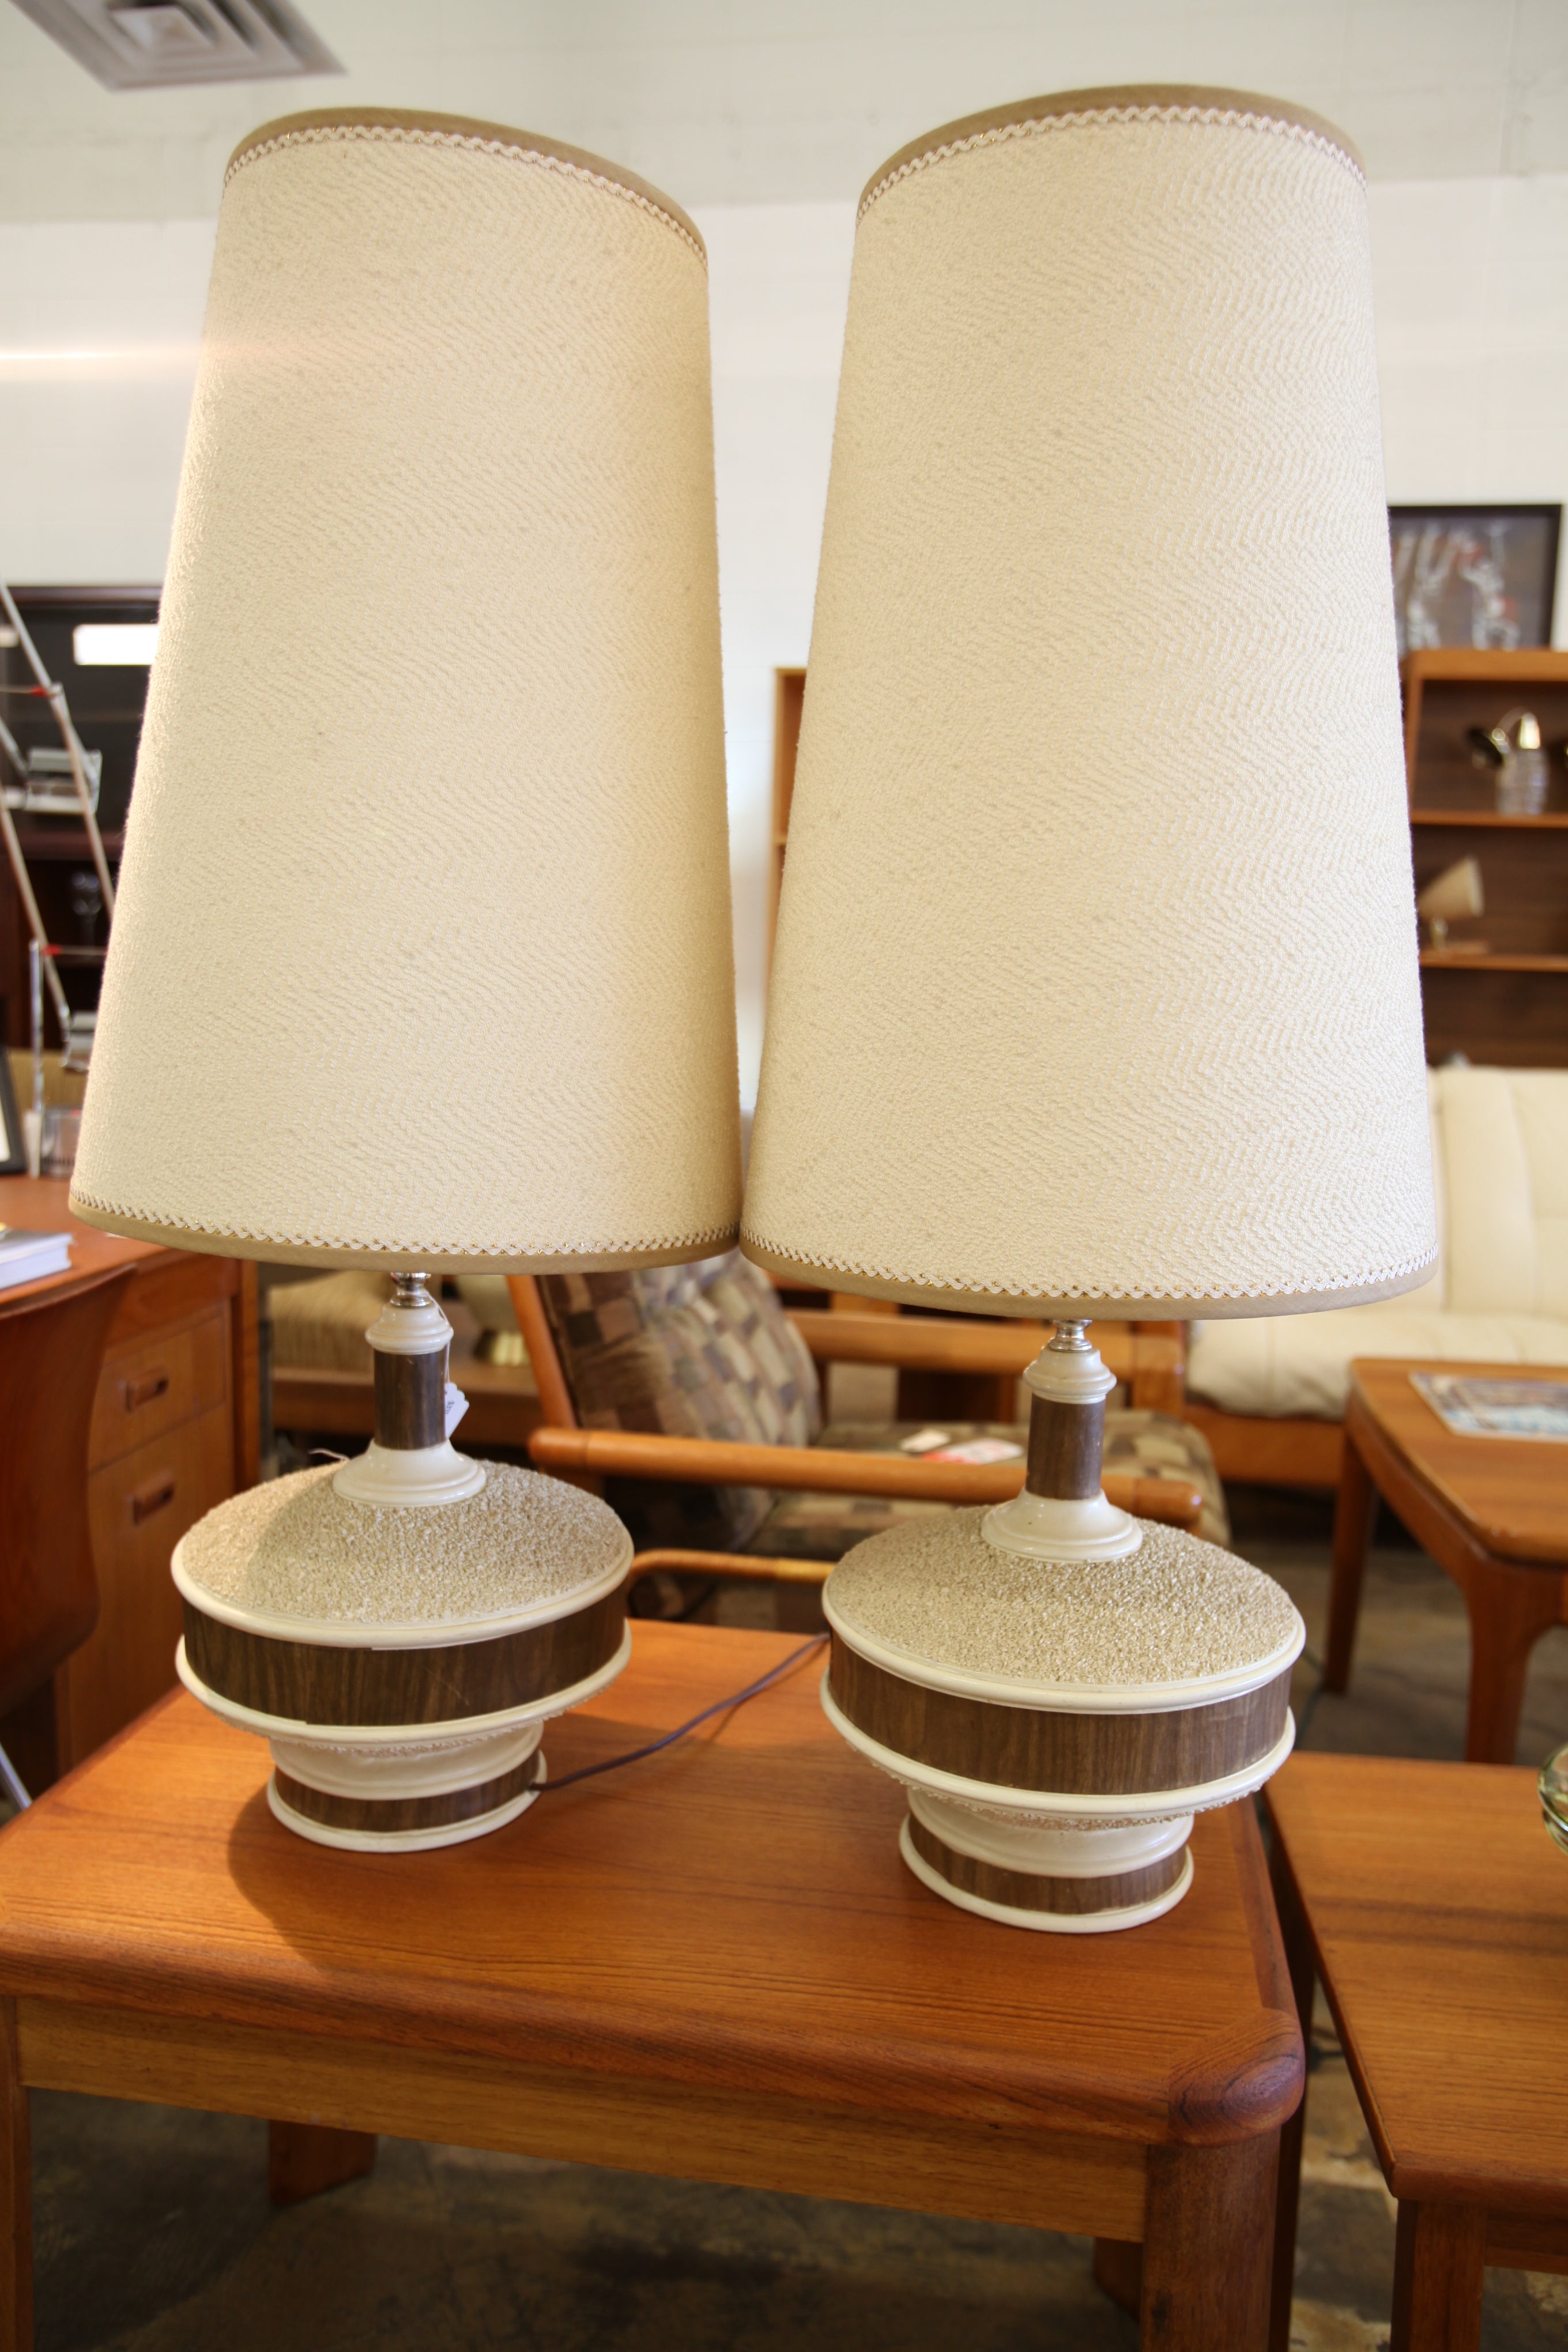 Set of 2 Tall Vintage MCM Lamps (36.5"H x 15" Dia)